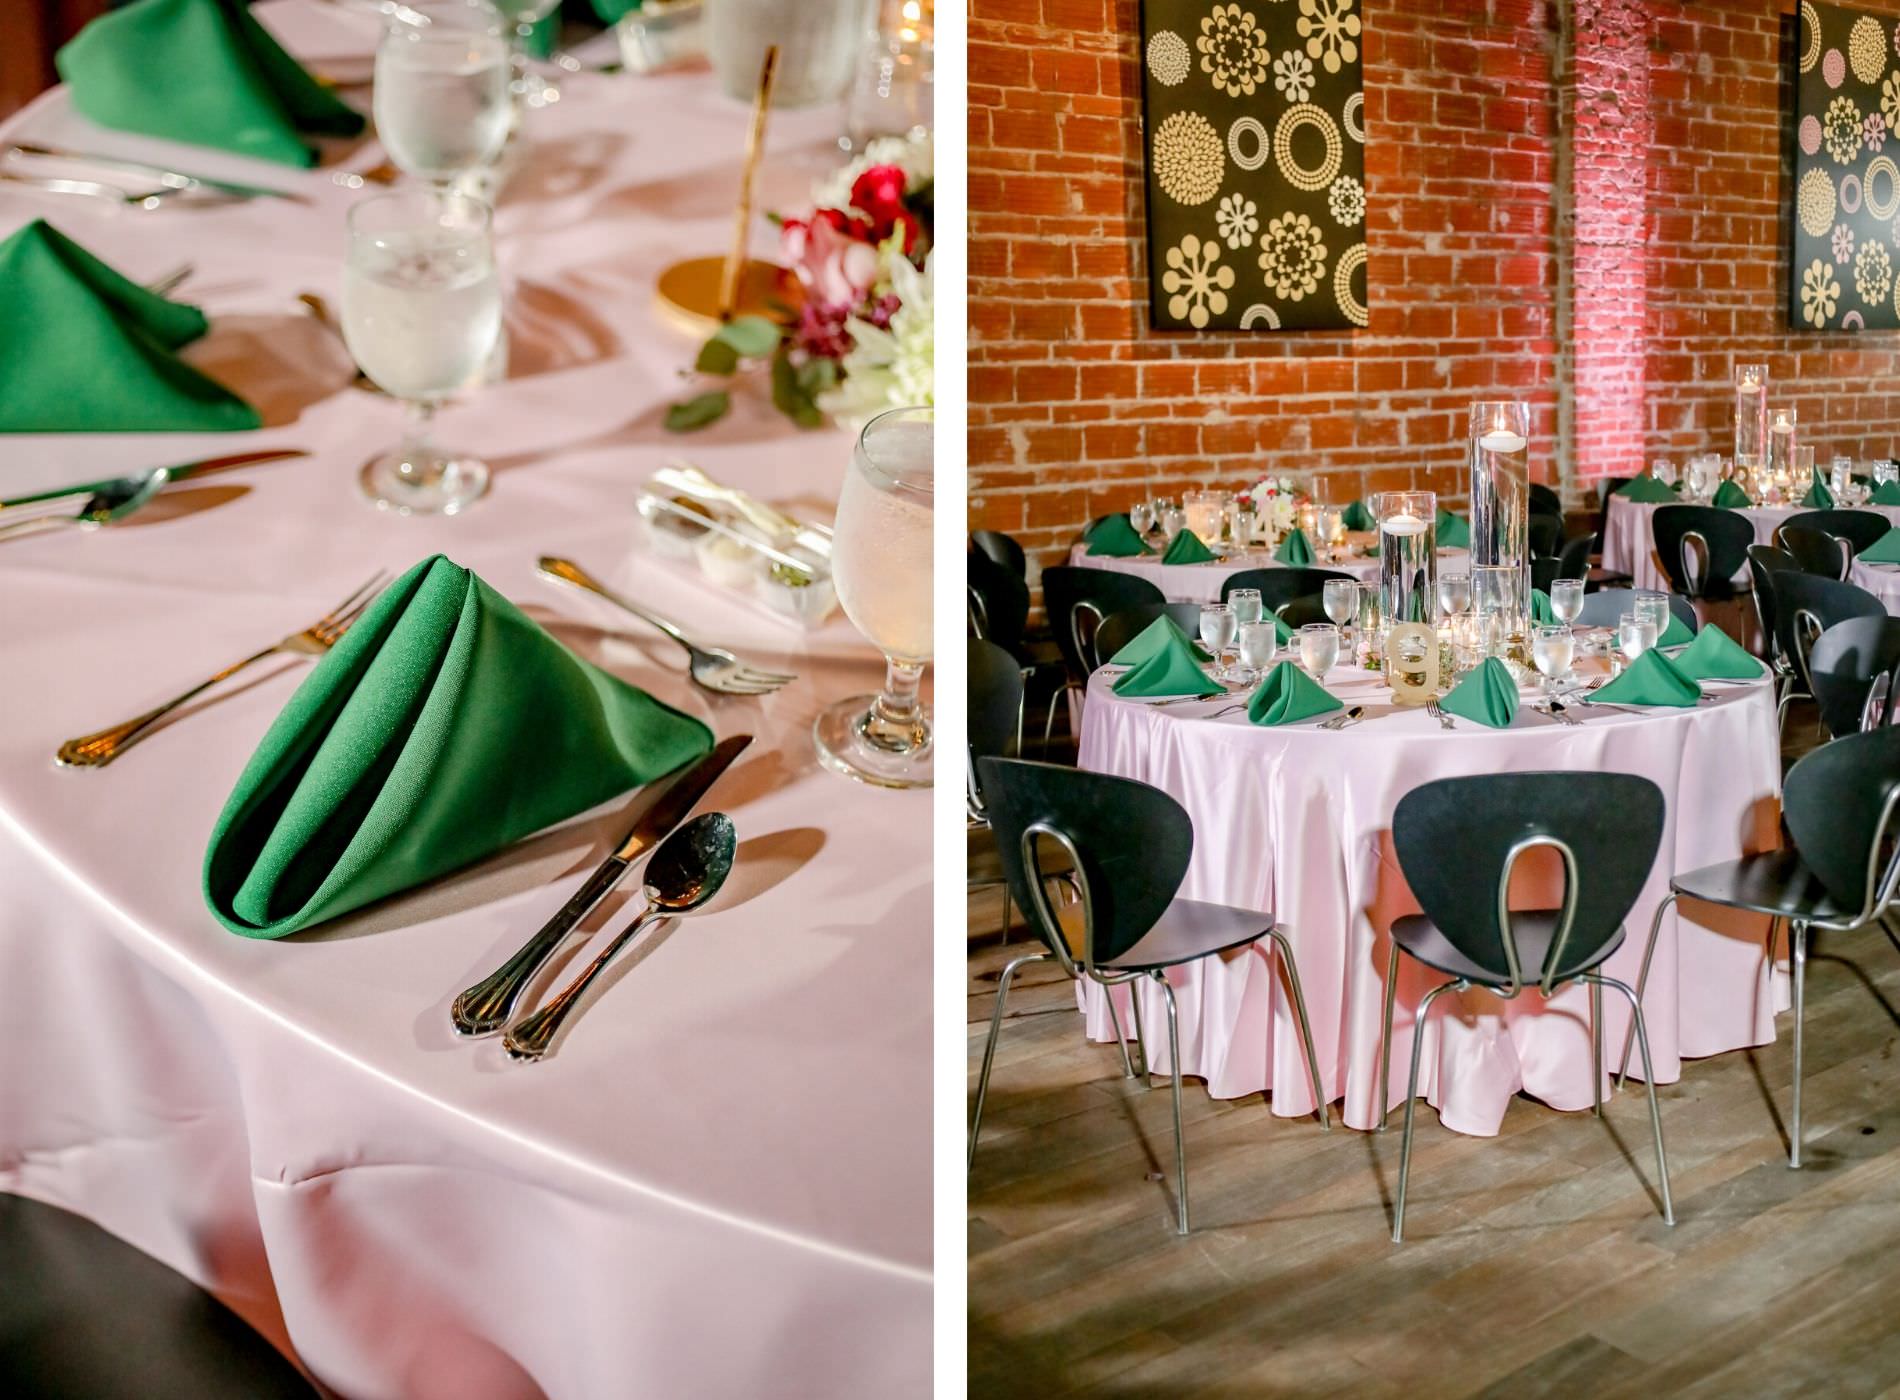 St. Patrick's Day Inspired Wedding Decor at Reception, Round Tables with Dusty Rose, Blush Pink Linens, Emerald Green Napkins | Florida Wedding Photographer Lifelong Photography Studios | Tampa Bay Unique Wedding Venue NOVA 535 in Downtown St. Pete